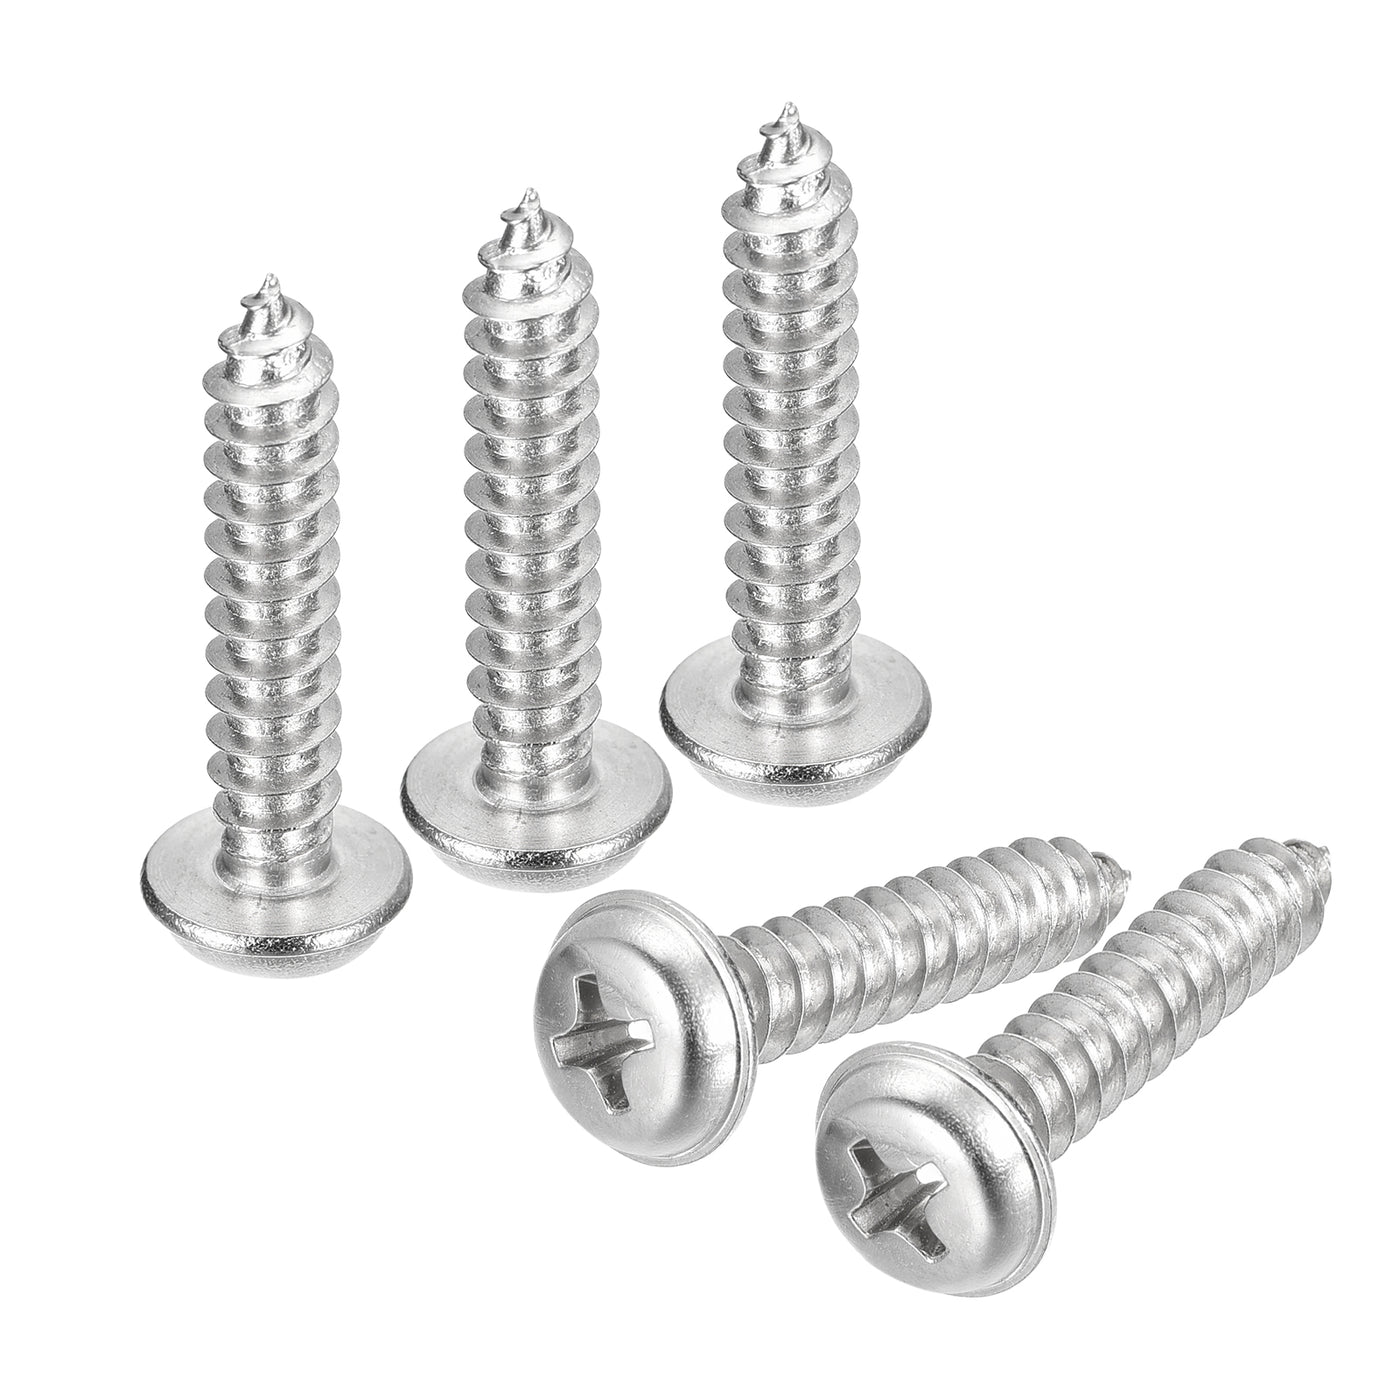 uxcell Uxcell ST5x25mm Phillips Pan Head Self-tapping Screw with Washer, 100pcs - 304 Stainless Steel Wood Screw Full Thread (Silver)